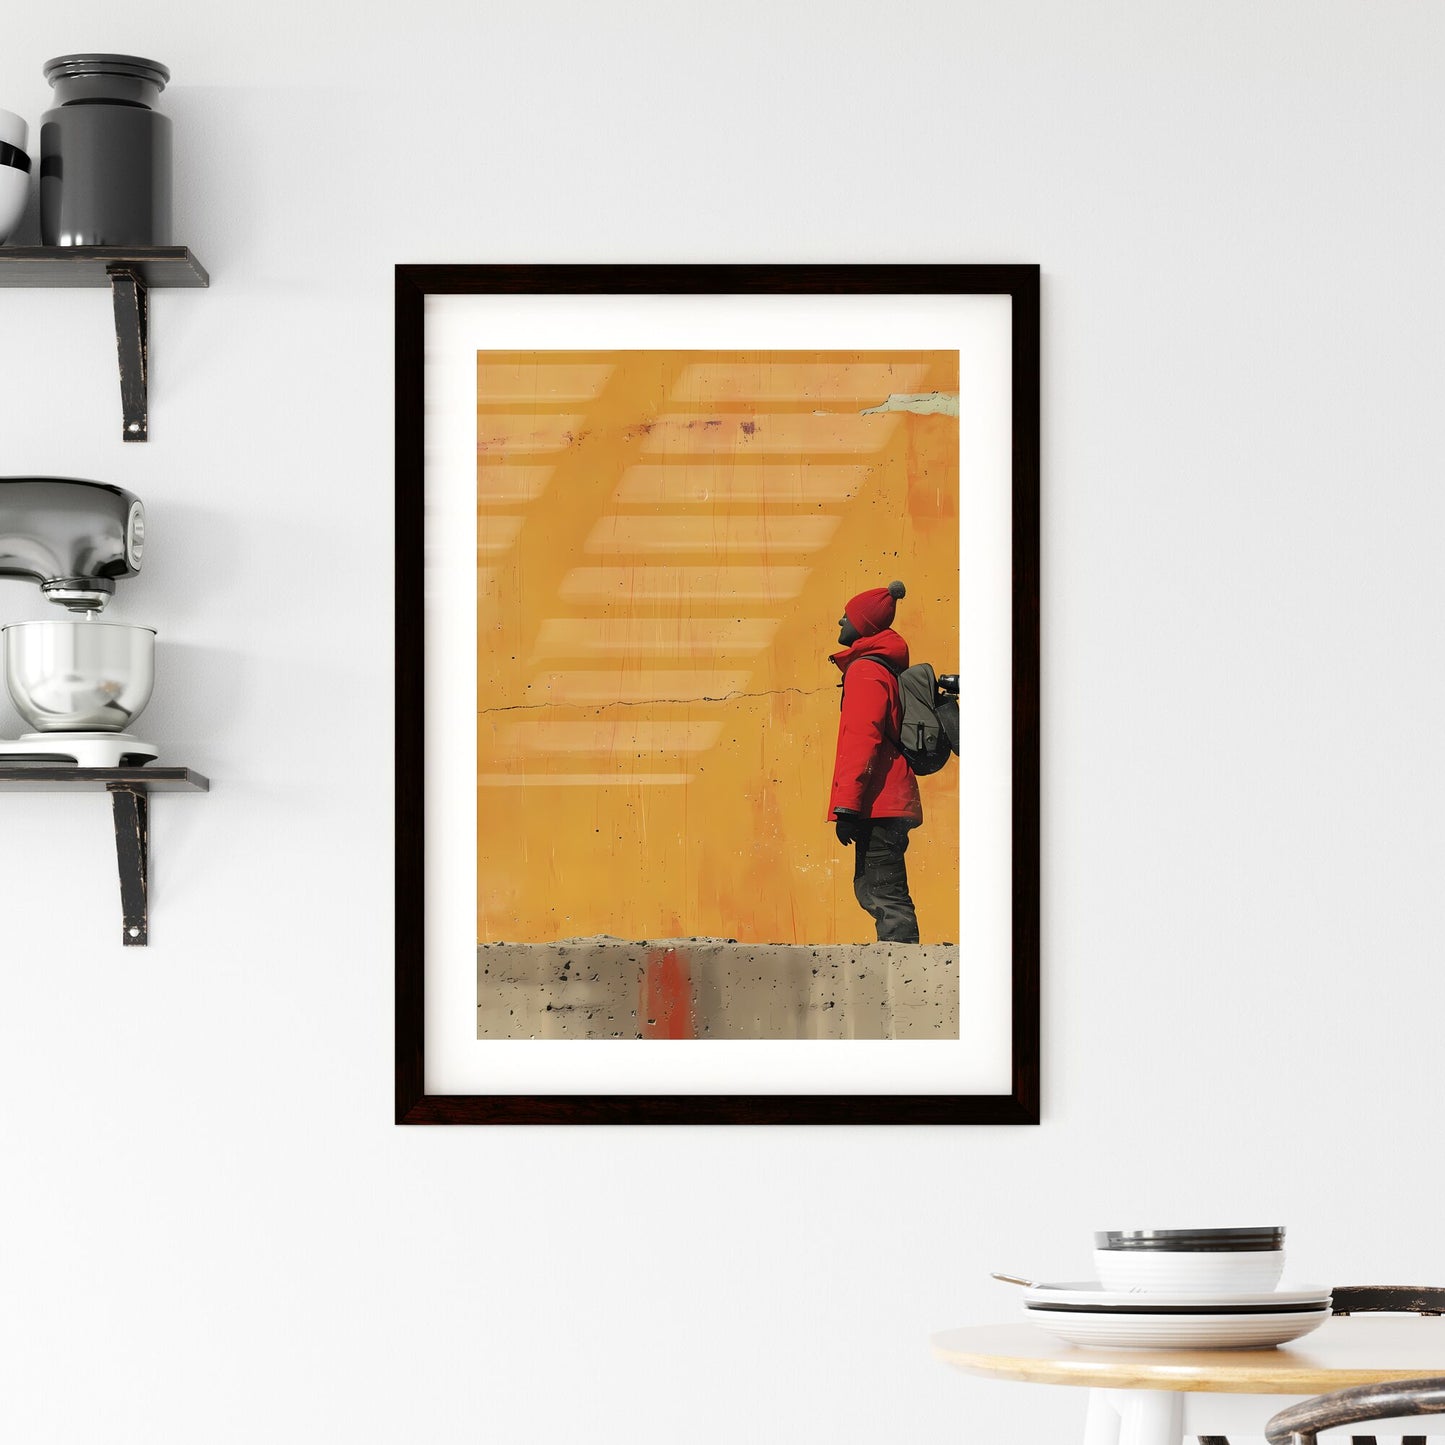 A TRENDY young person records voice - Art print of a person in a red coat and hat with a camera Default Title